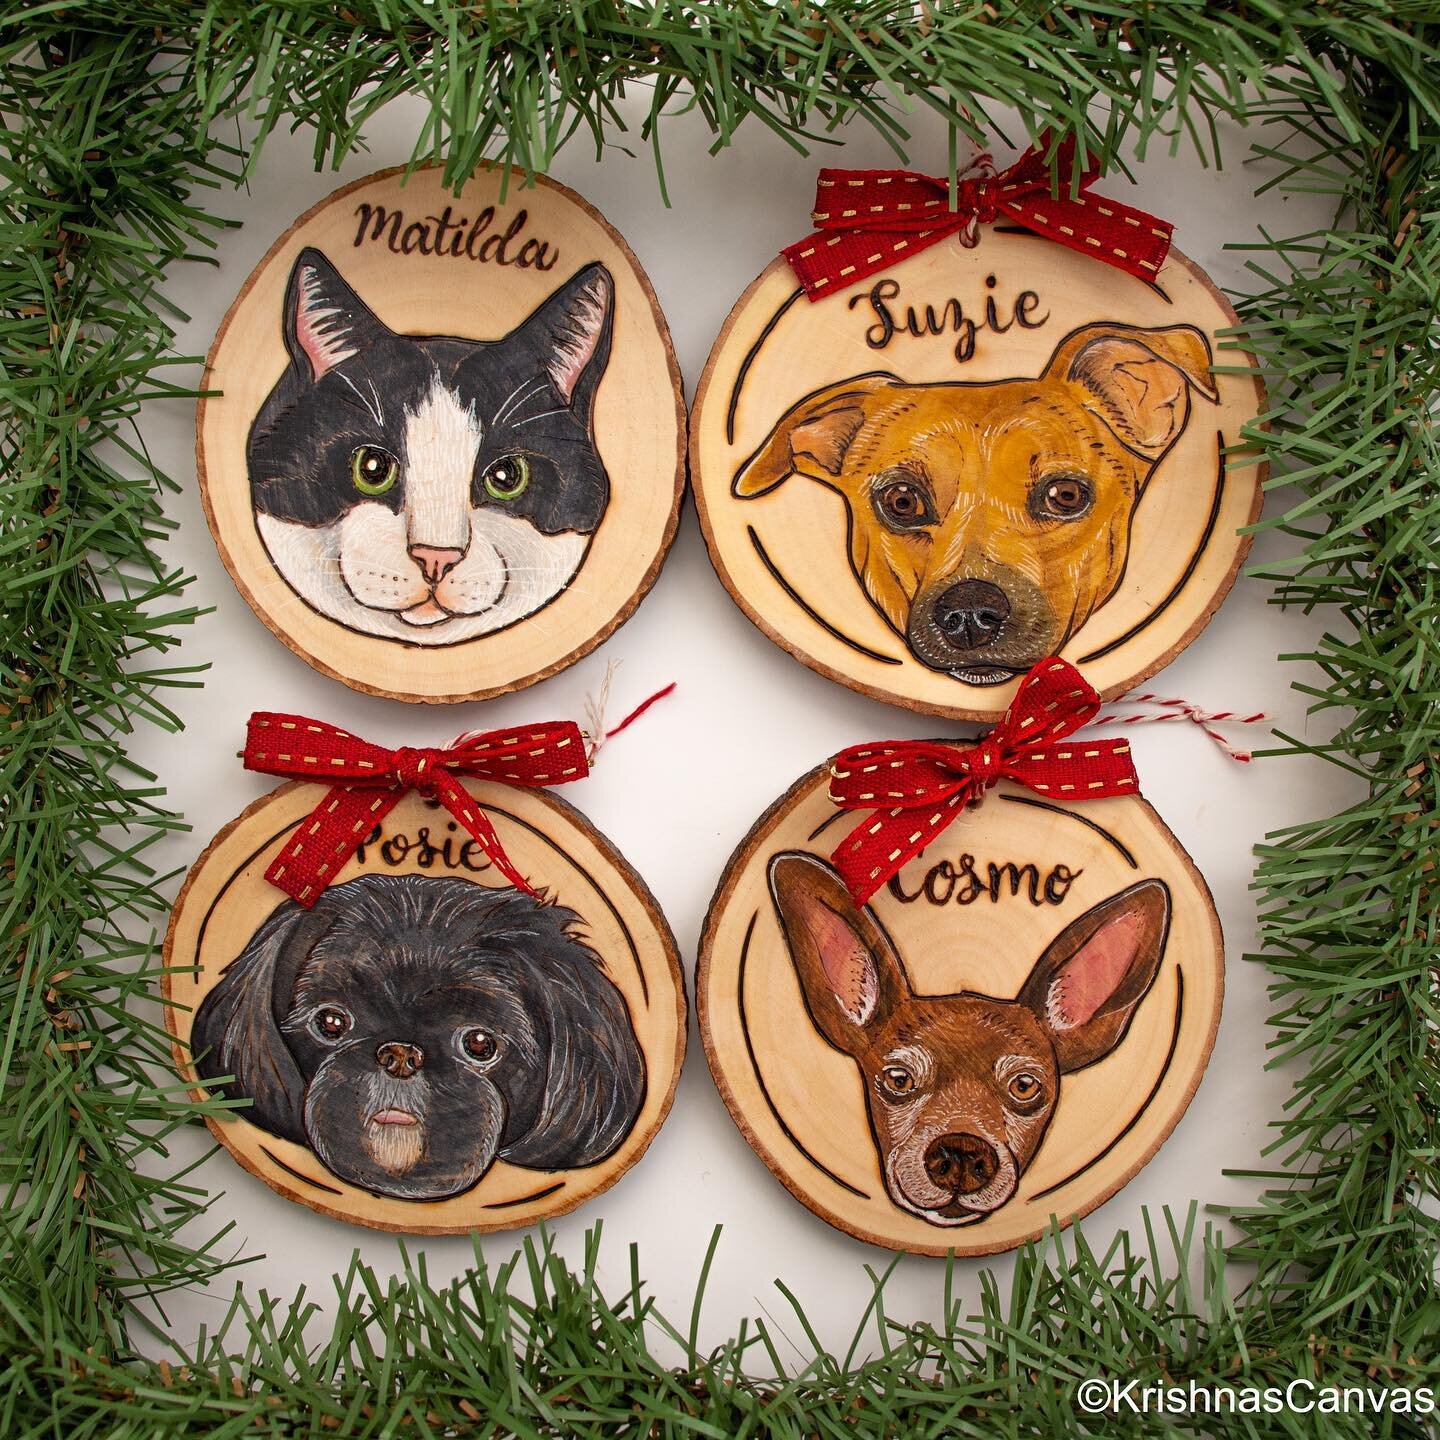 Working on my last batch of pet ornaments for the season! If you would like one, I have a few more left in stock! Order in the next couple days to ensure it gets to you by Christmas!